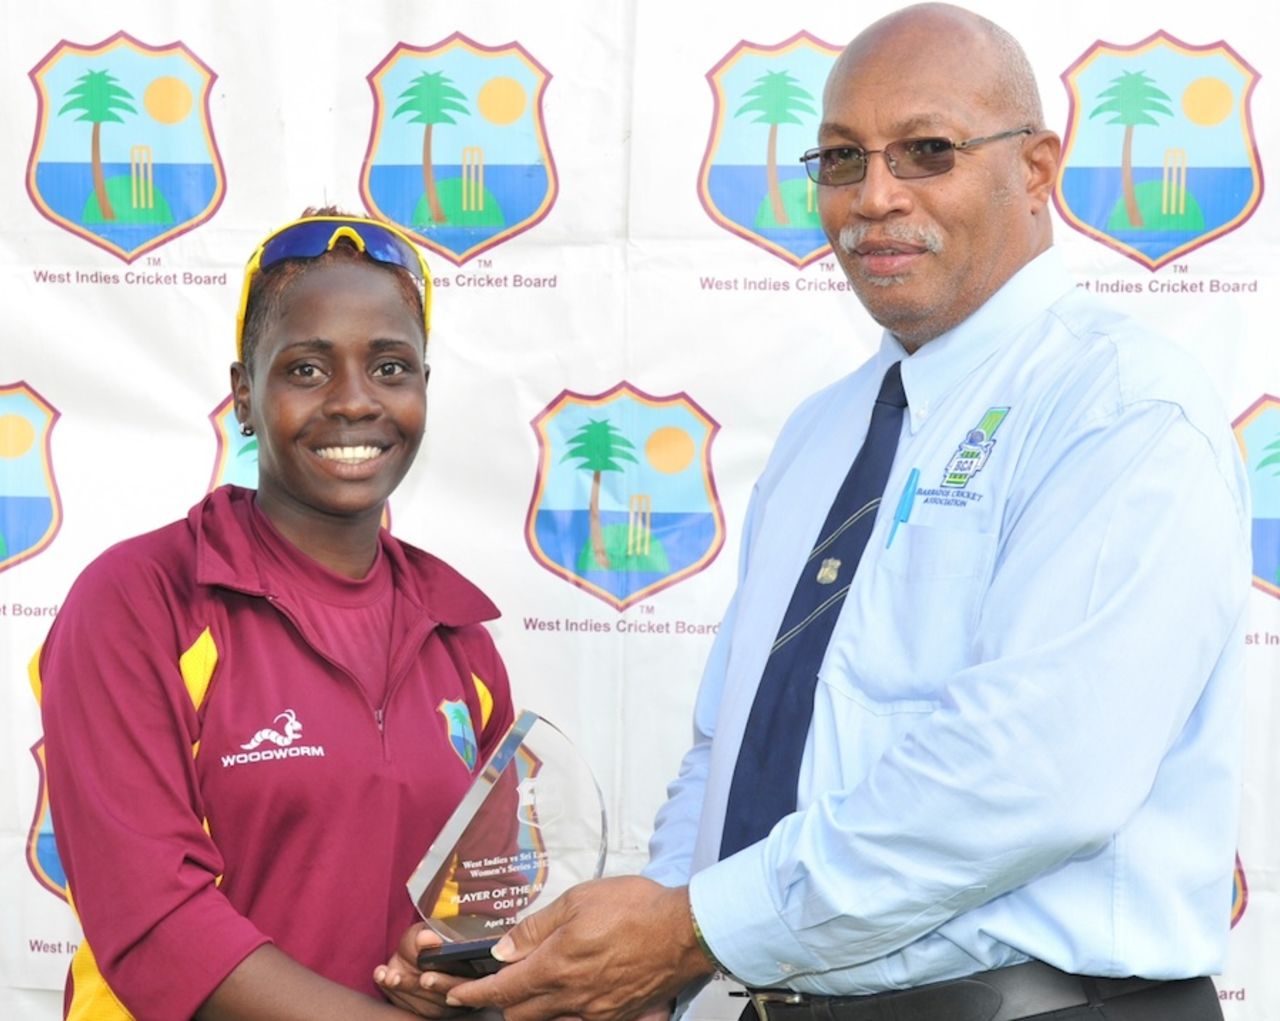 Shanel Daley gets the player-of-the-match award, Sri Lanka Women's tour of West Indies, 2012, Barbados, April 25, 2012